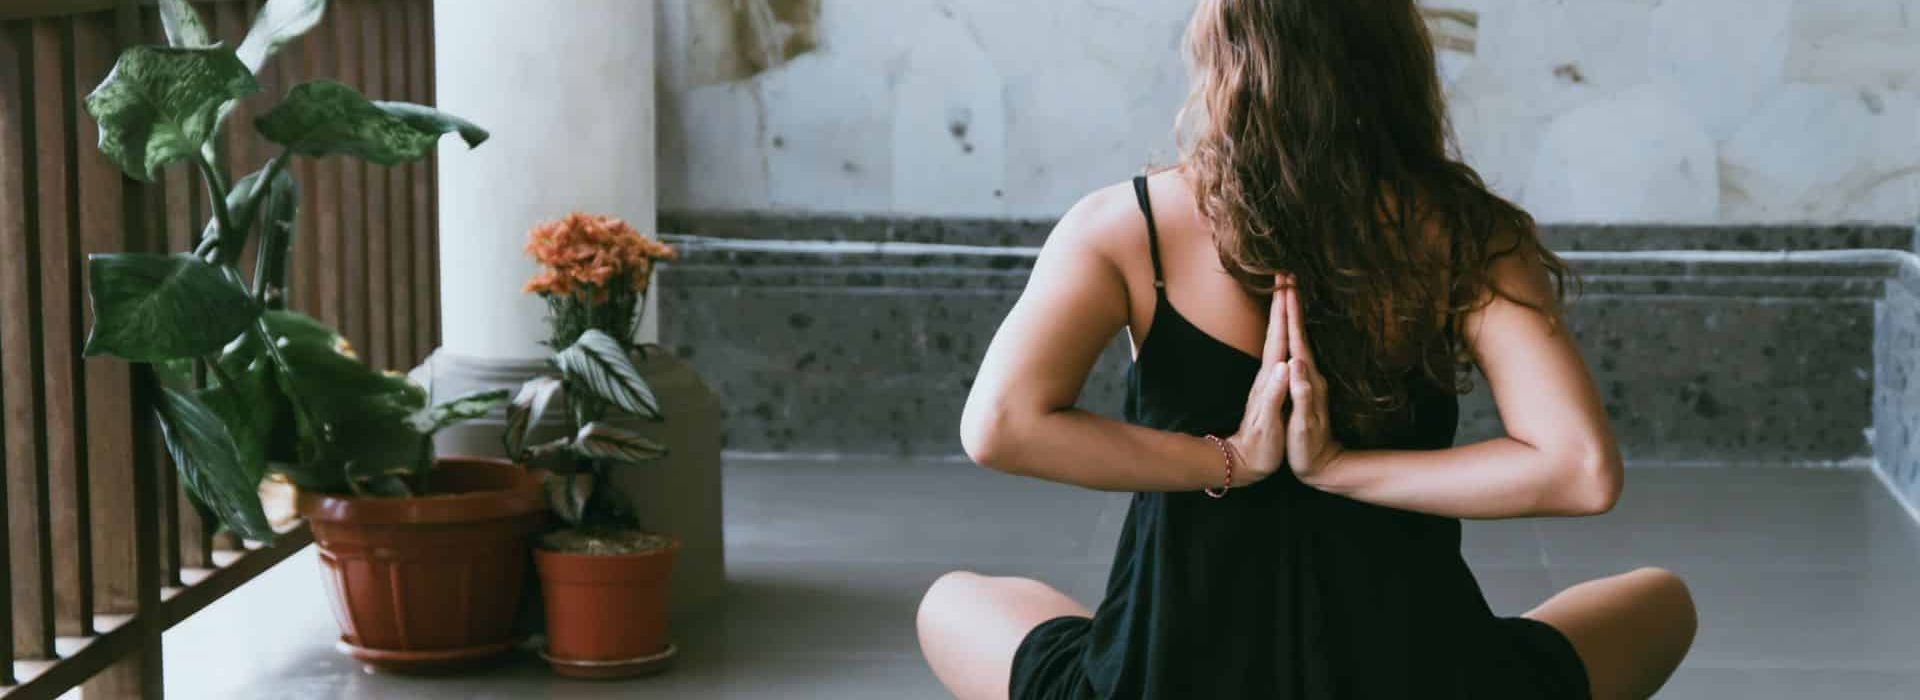 Can Yoga Help with Overcoming Addiction?